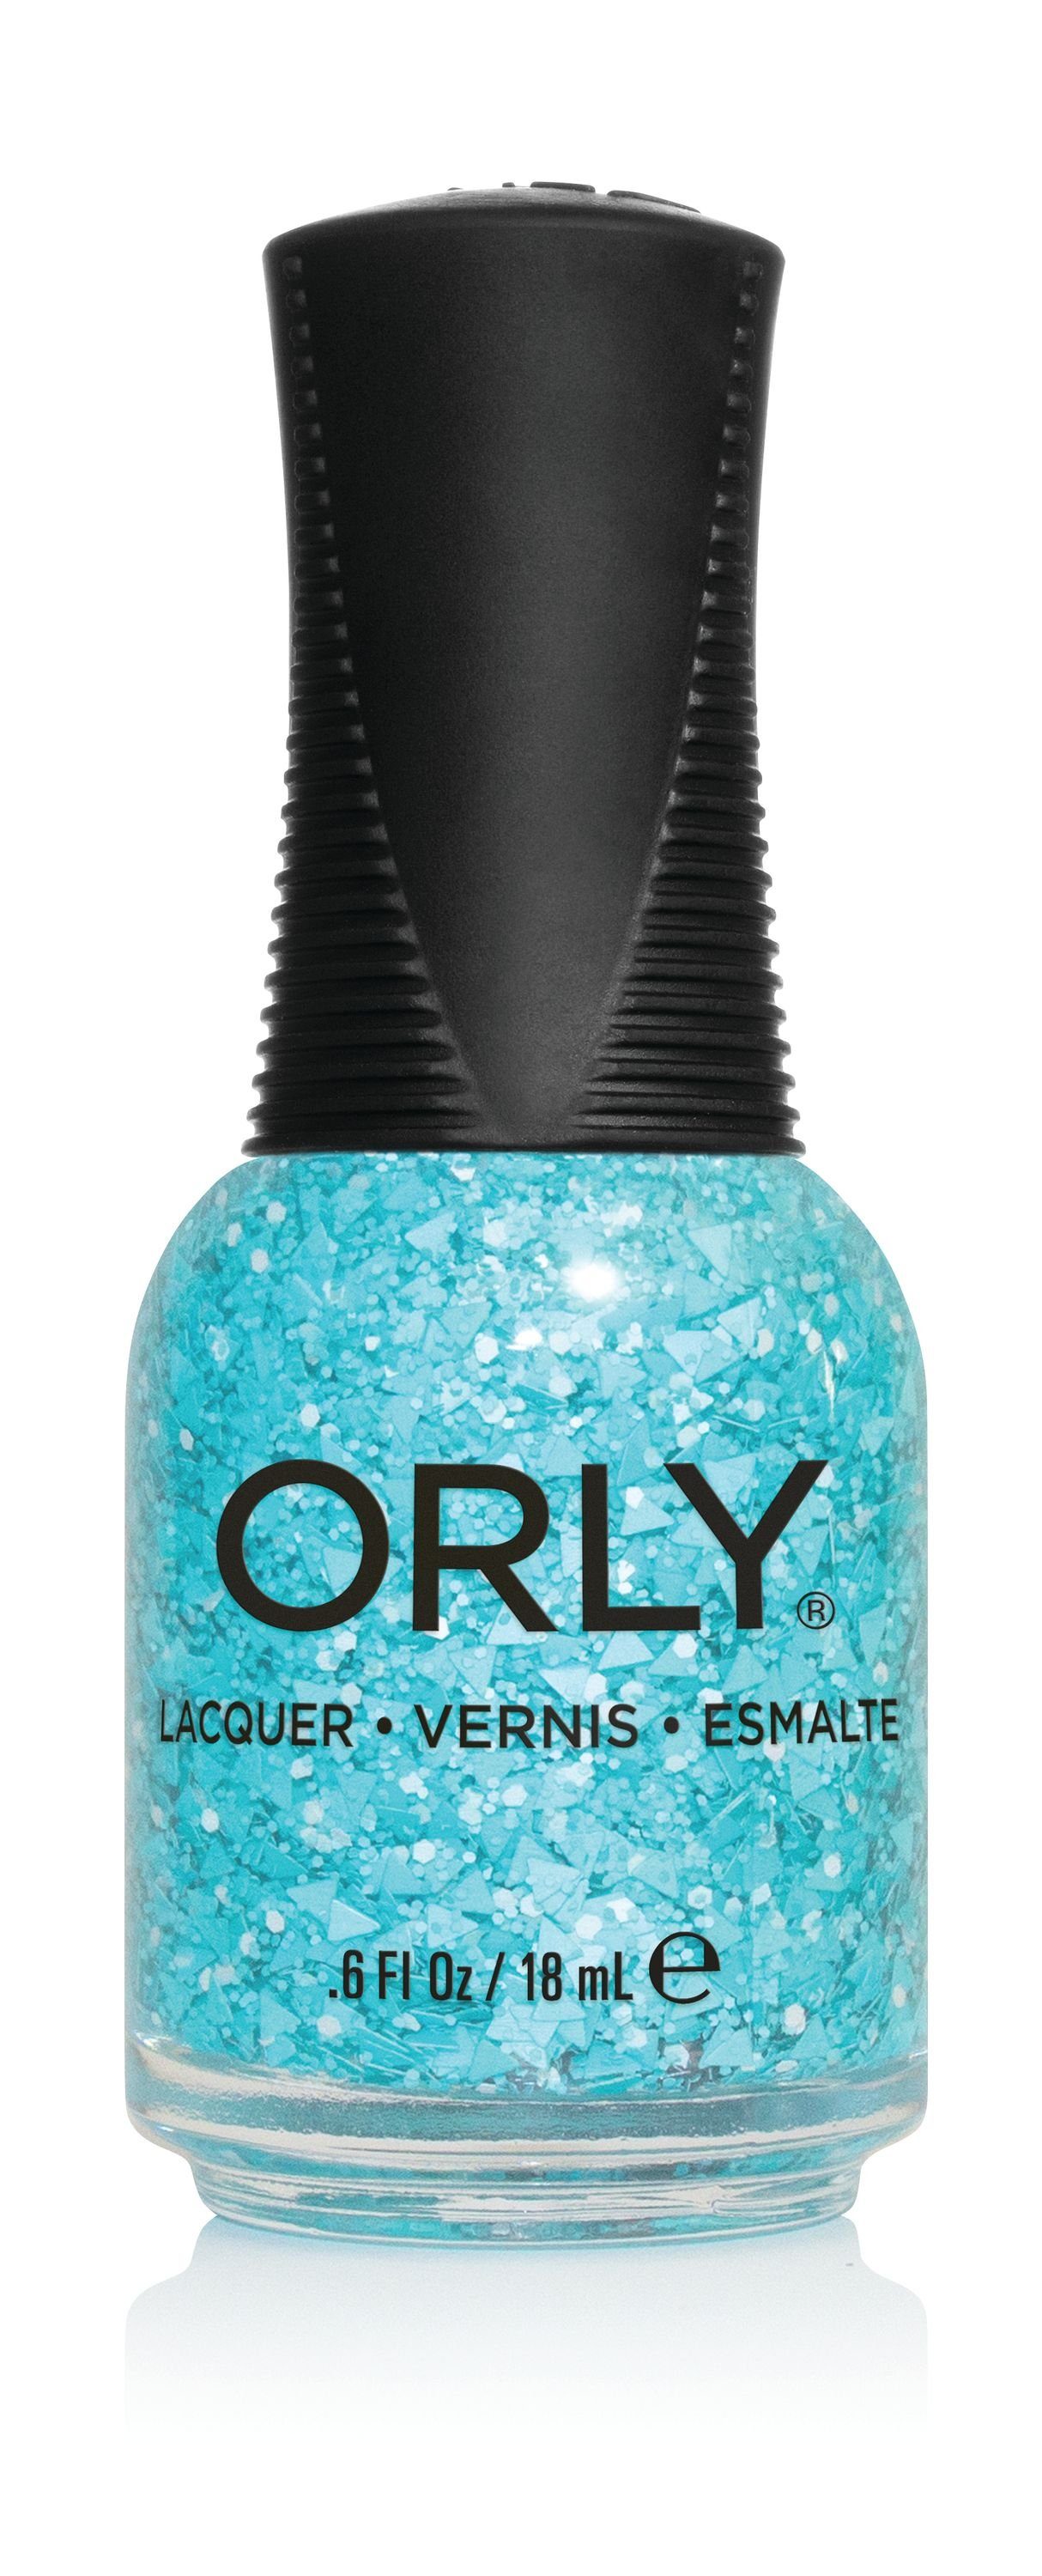 What's - Nagellack Teal, ORLY Big Nagellack ORLY The 18ML